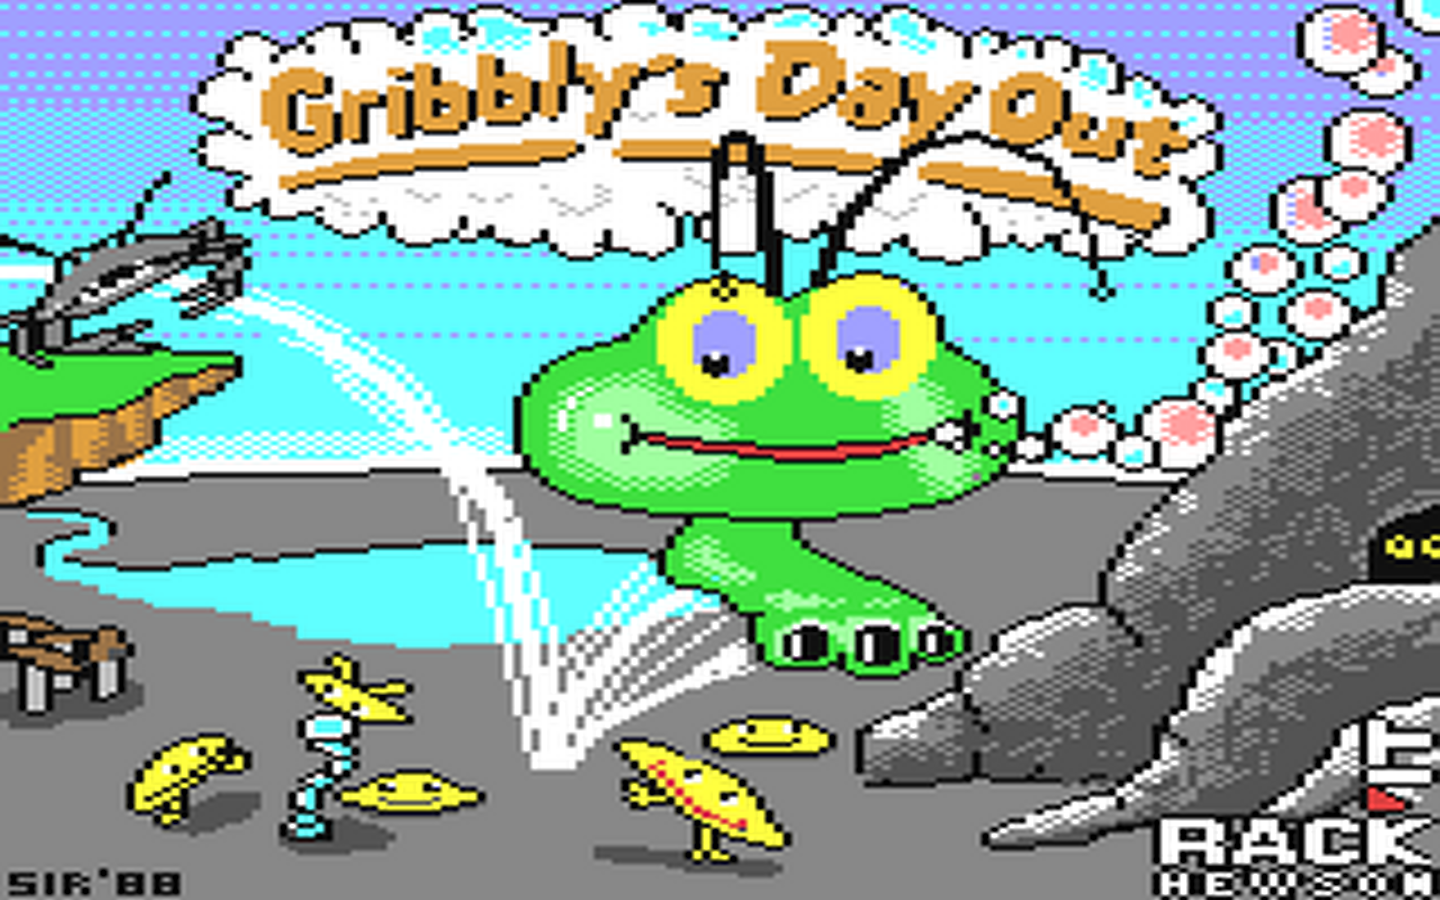 C64 GameBase Gribbly's_Special_Day_Out Hewson_Consultants_Ltd. 1986